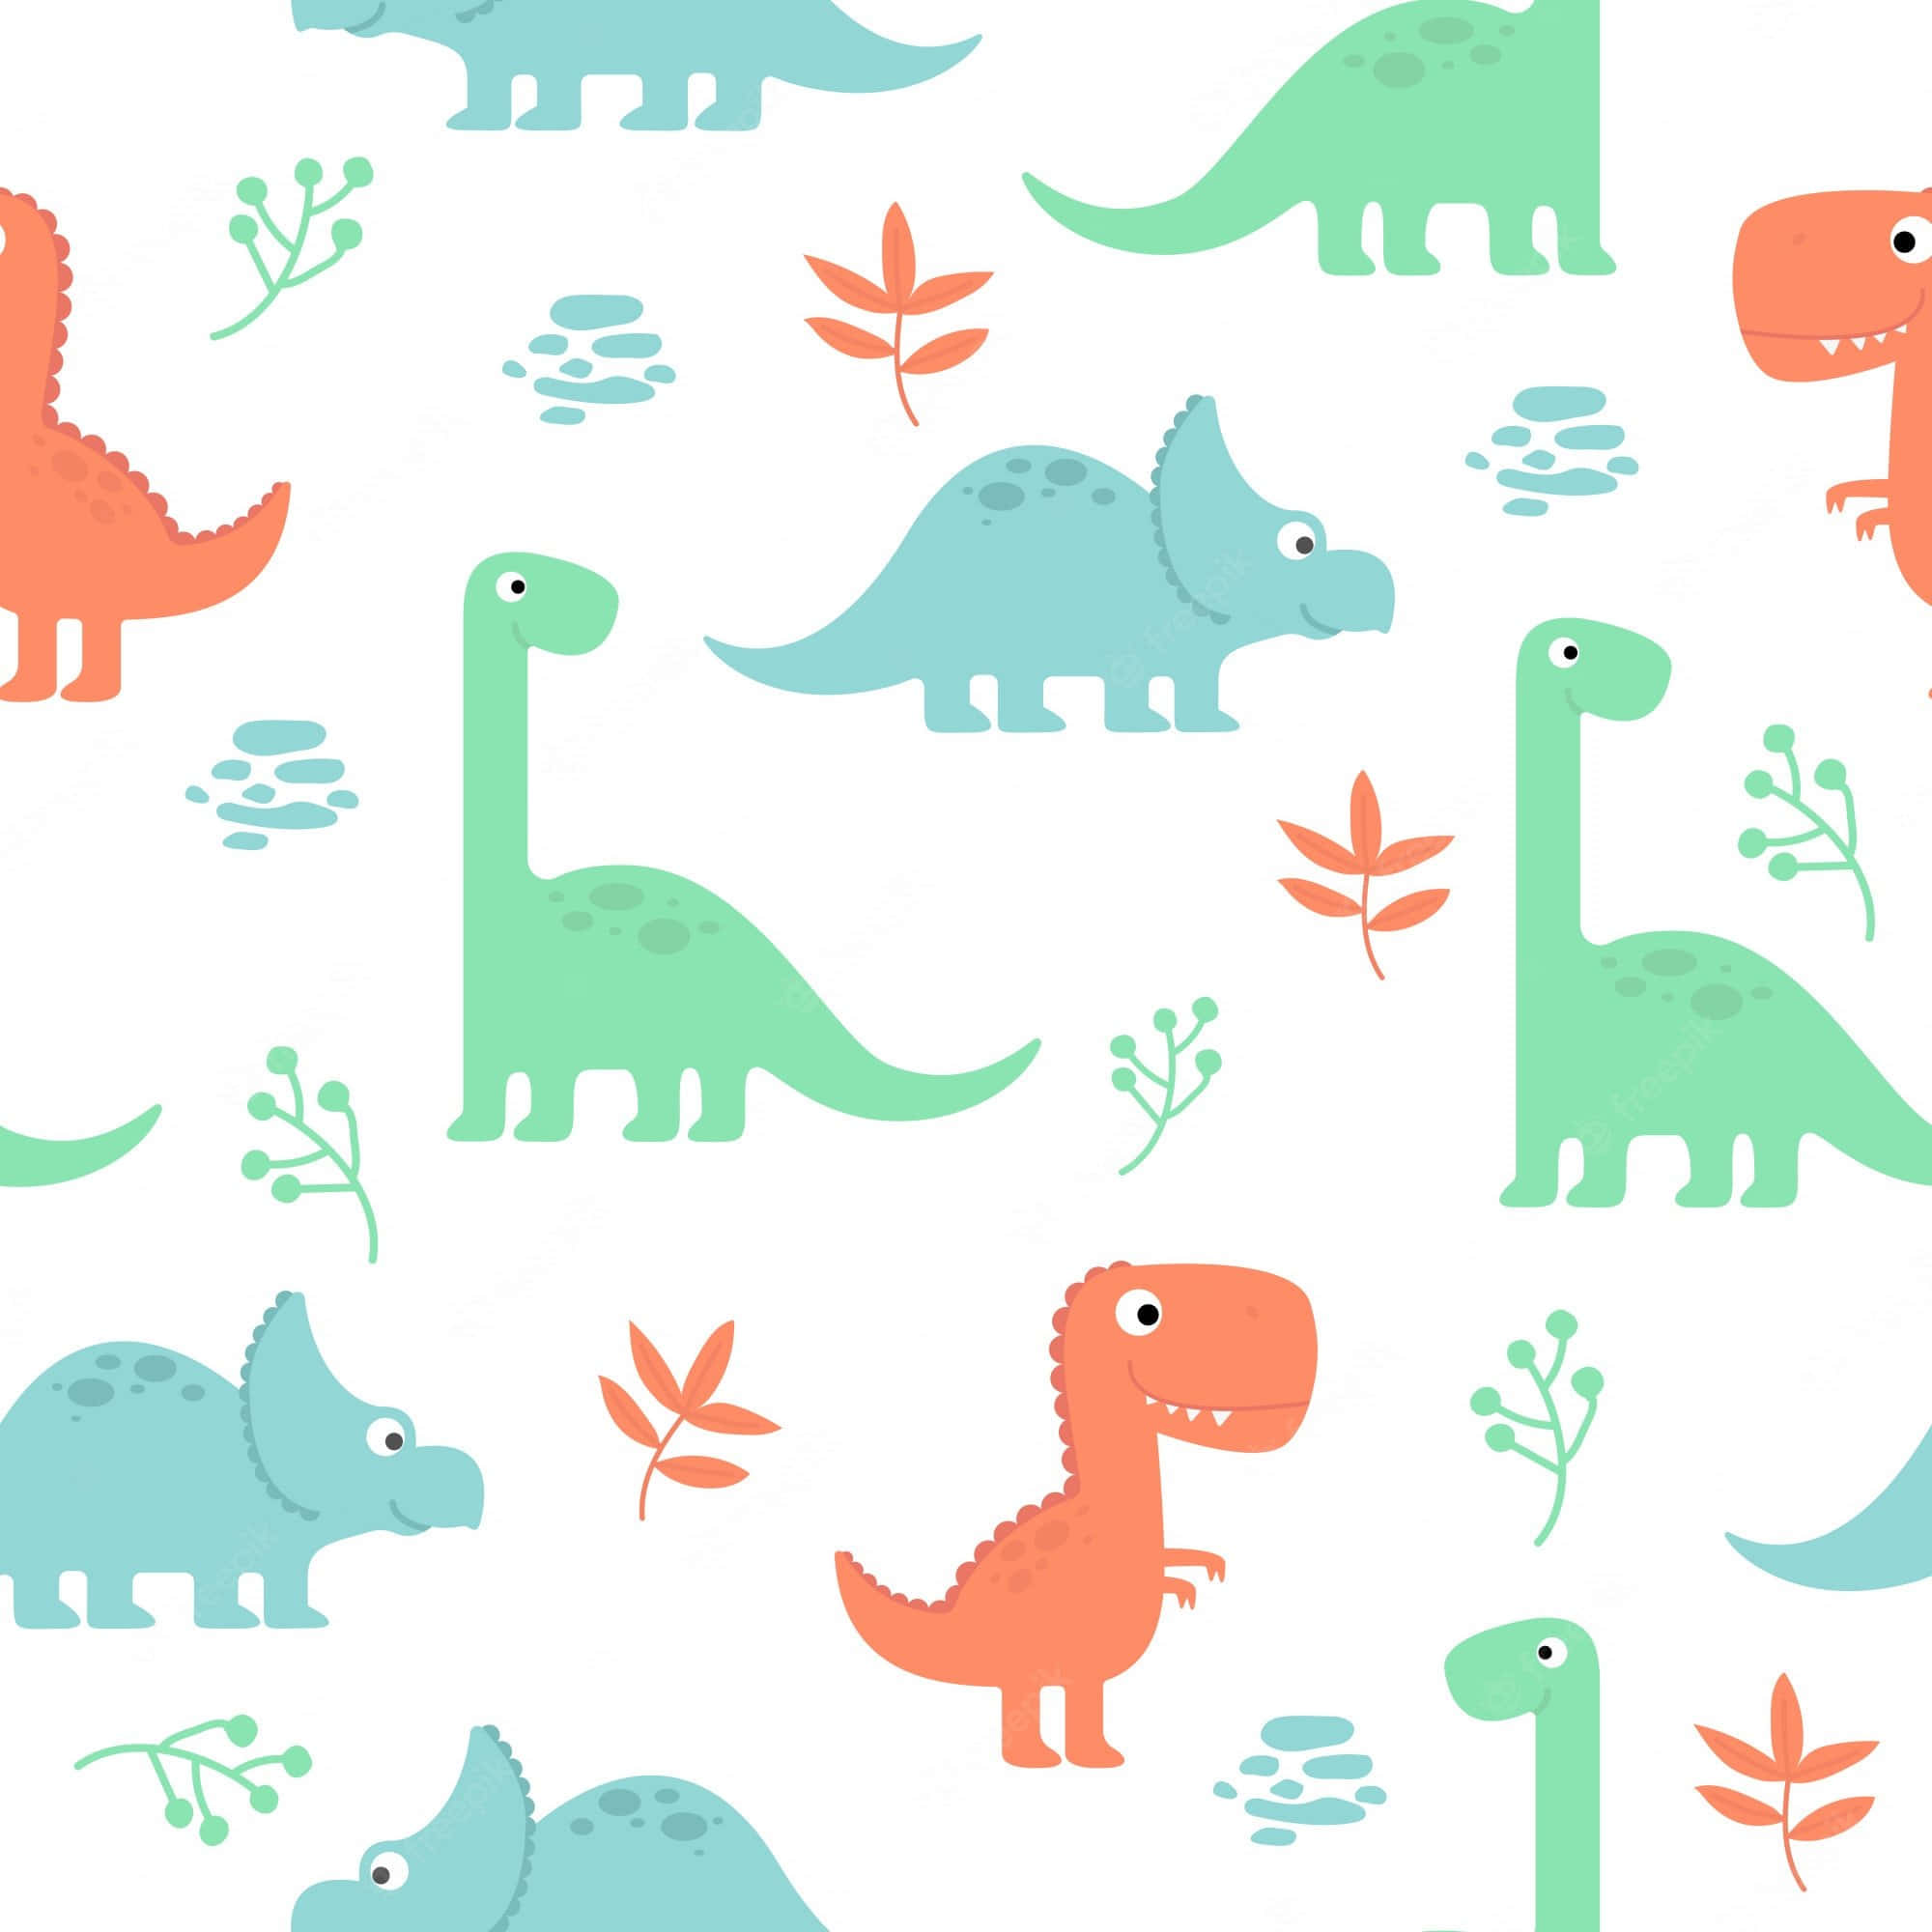 Adorable Dinosaur frolicking in a colorful prehistoric world